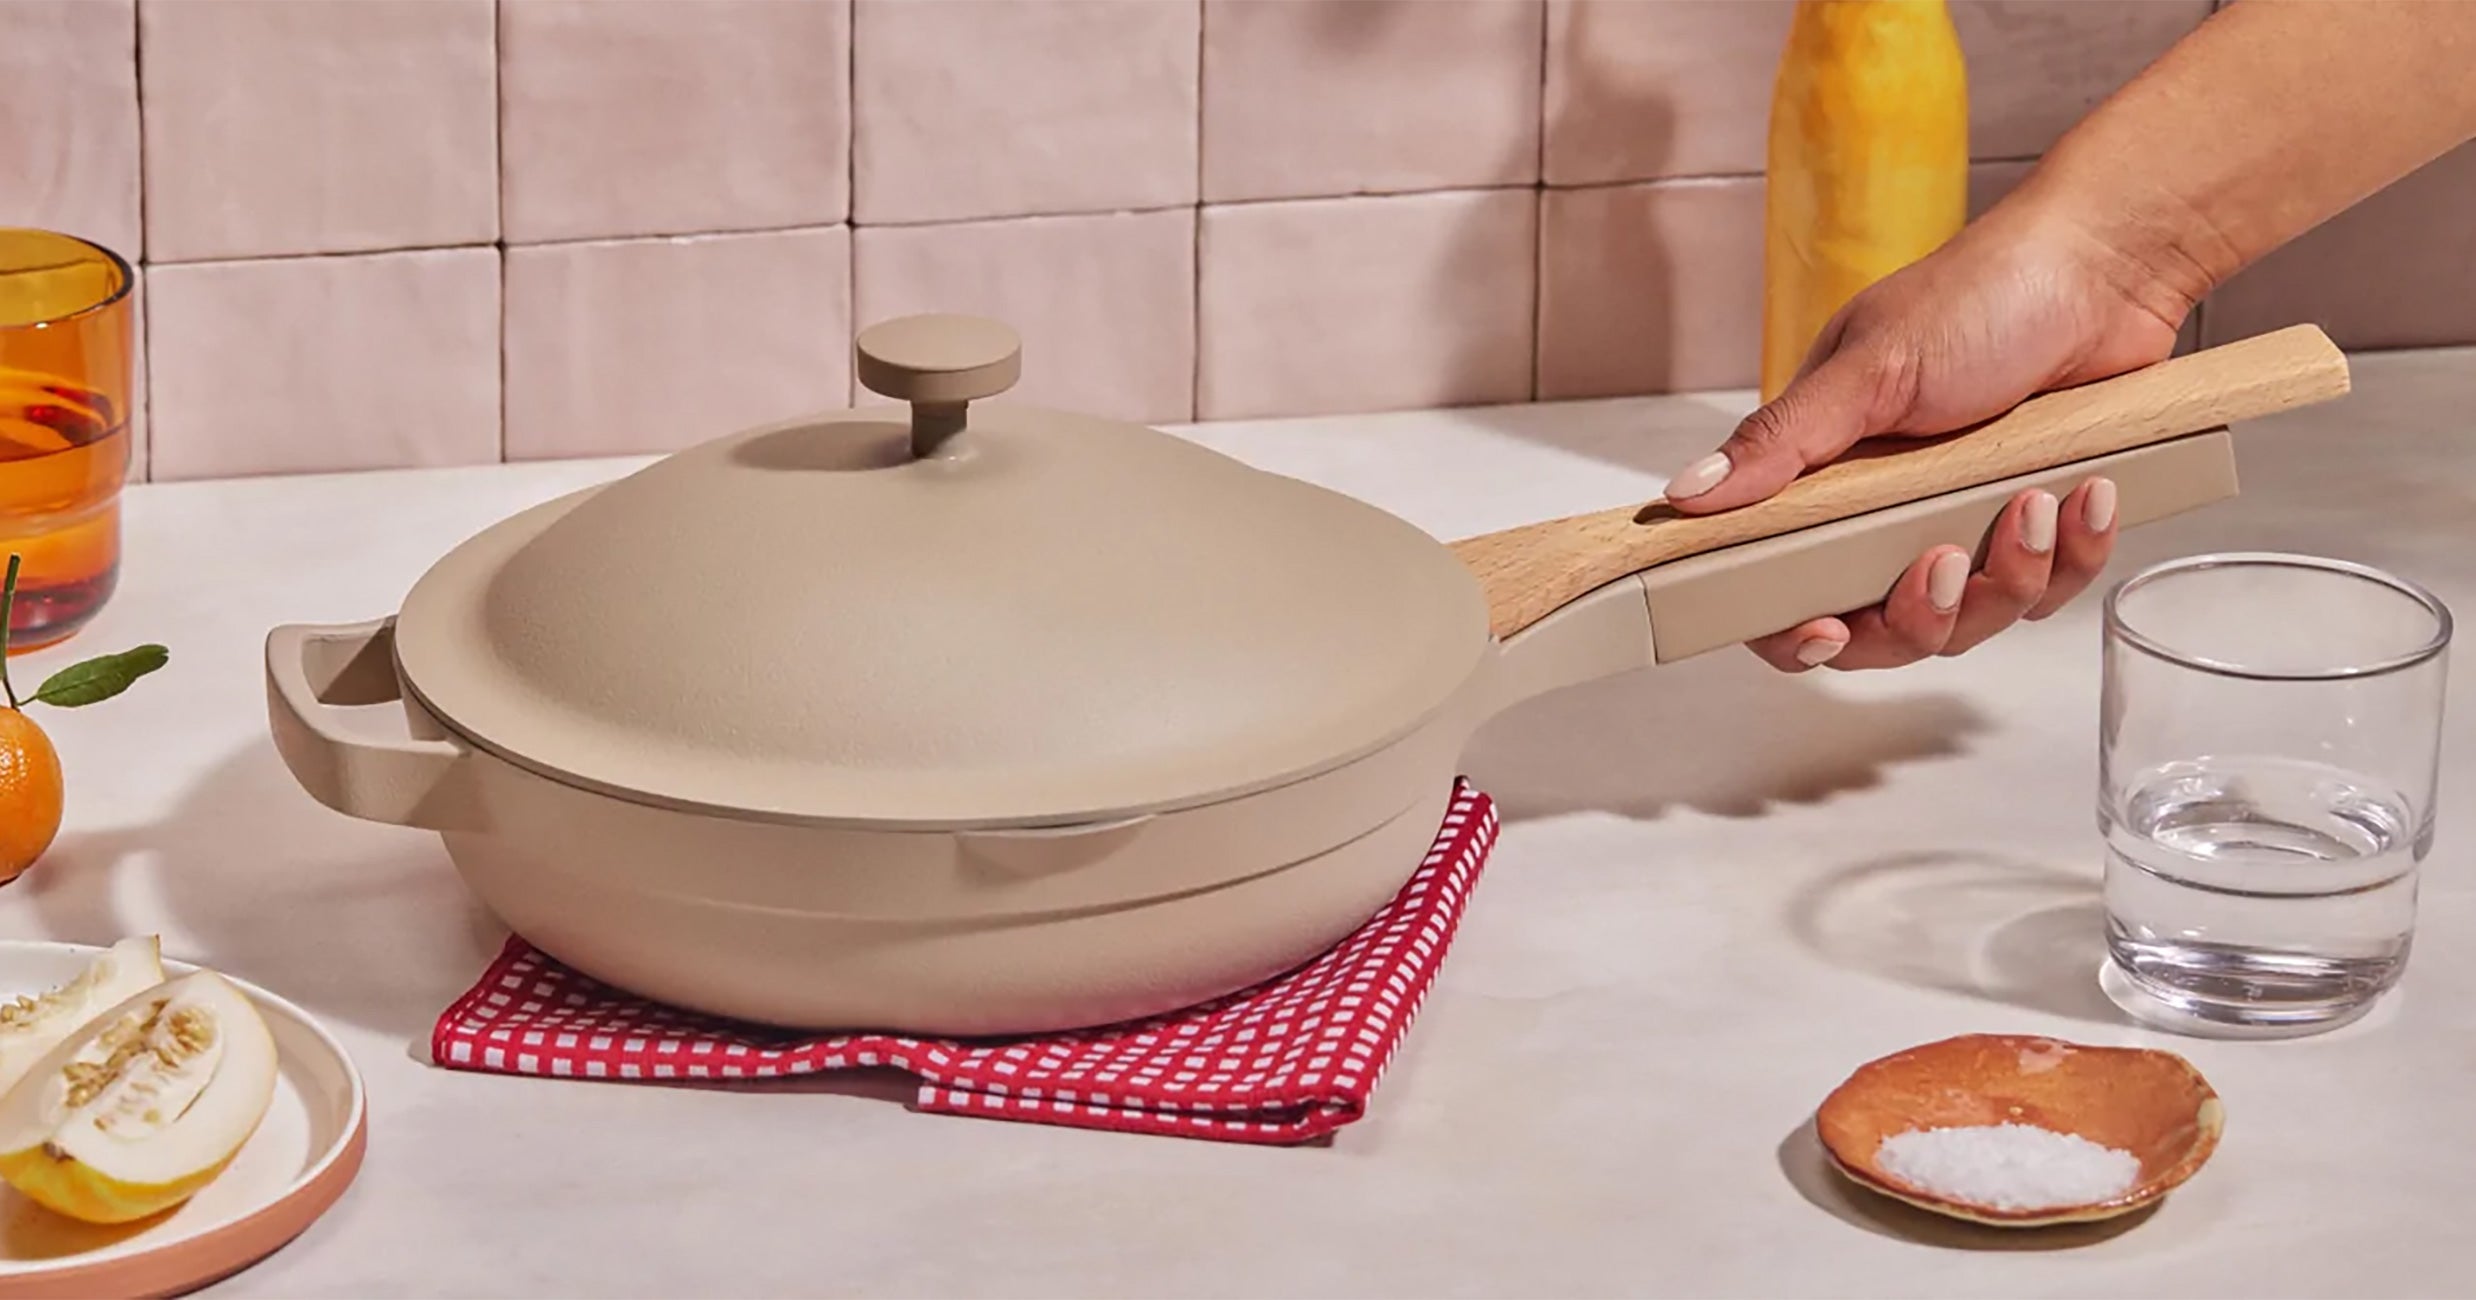 The Our Place Always Pan Sale Has Discounts up to 25% Off—Here's